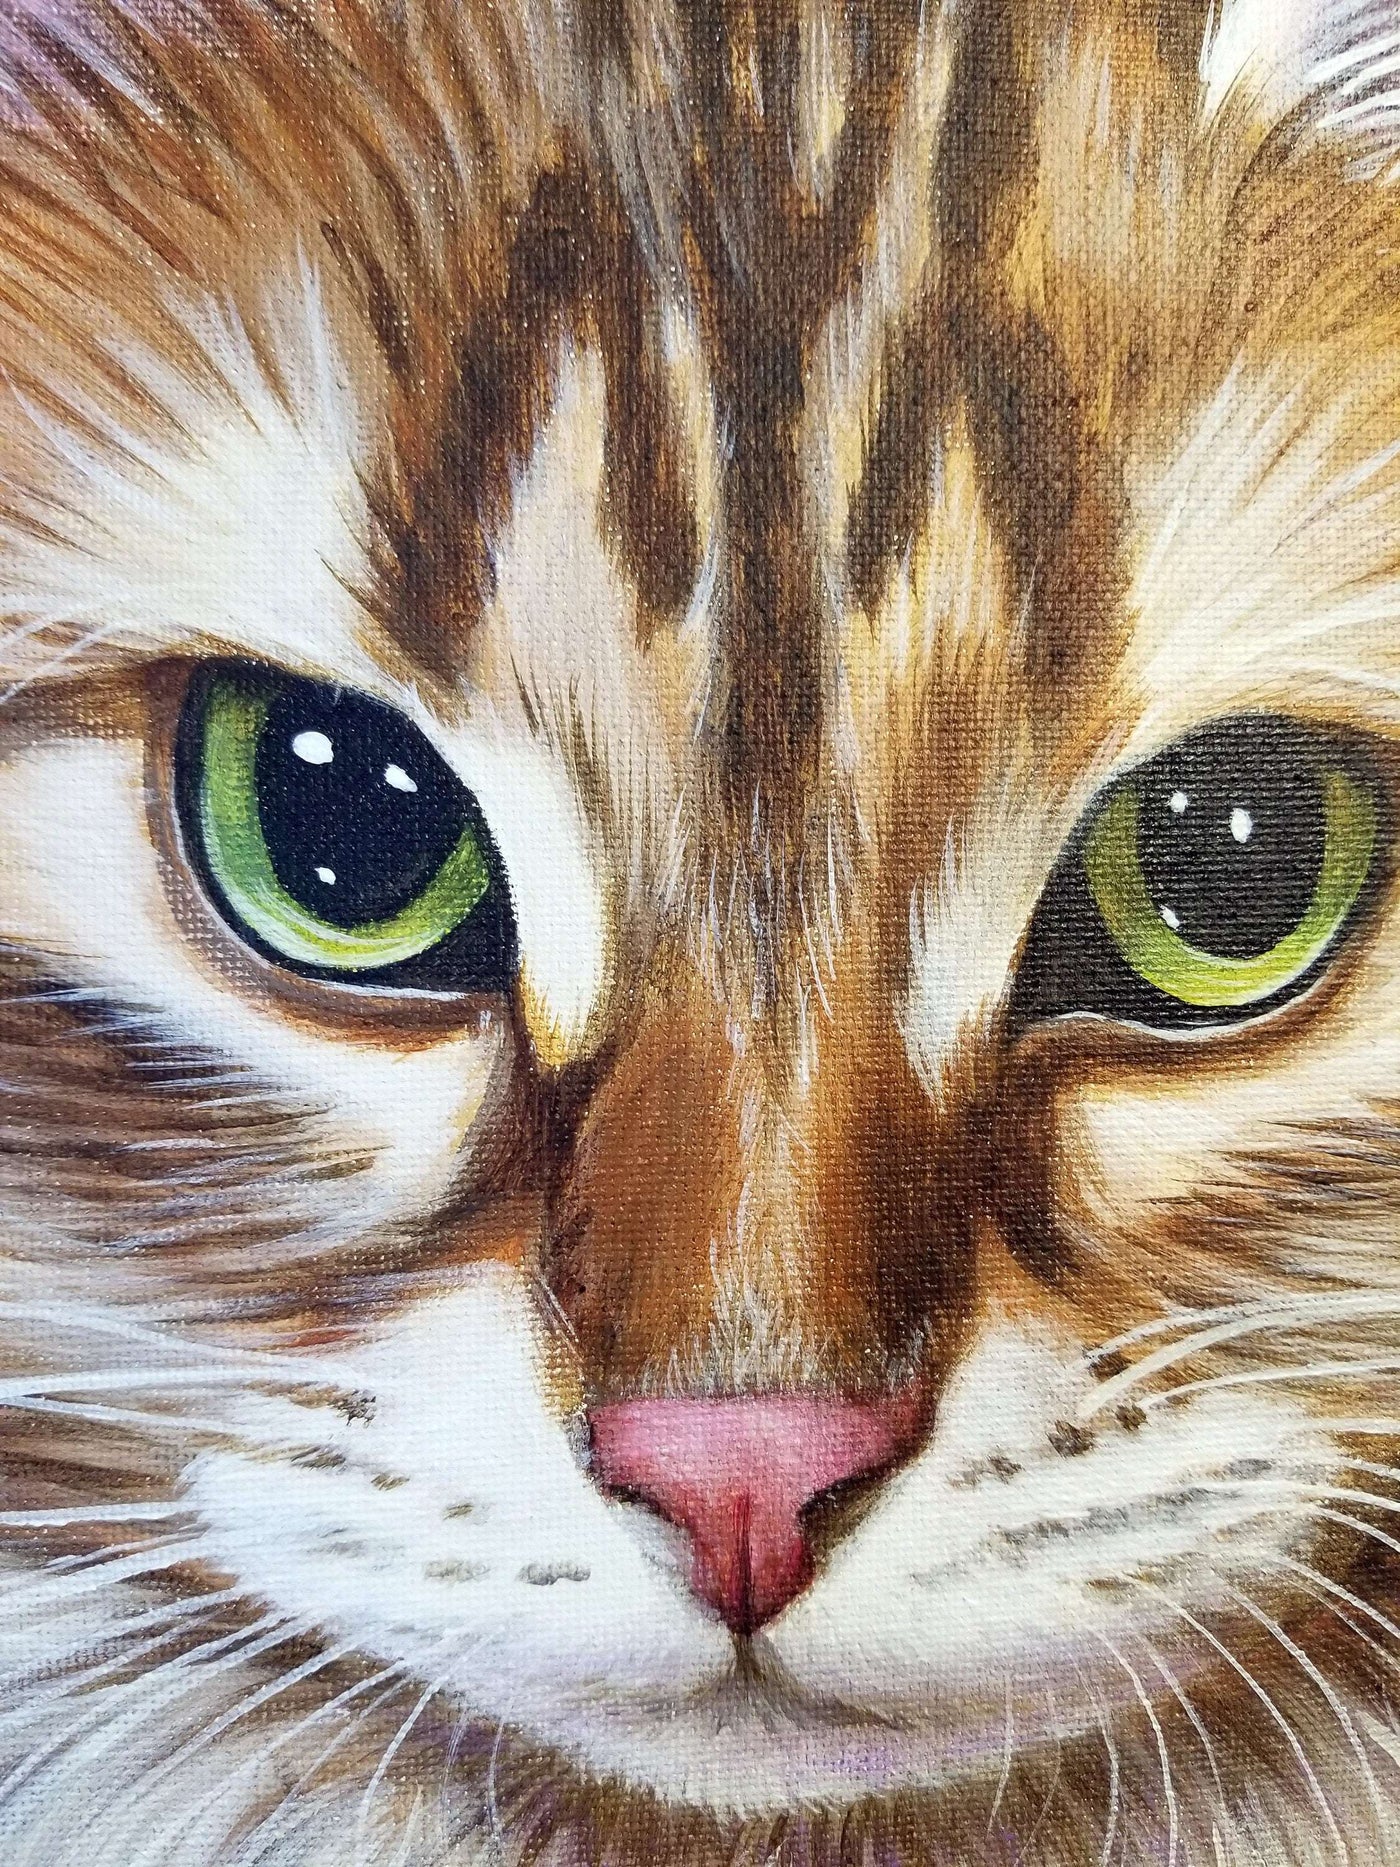 Close-up of a tabby cat's face from a pet portrait painting, highlighting intricate details in the fur and eyes.